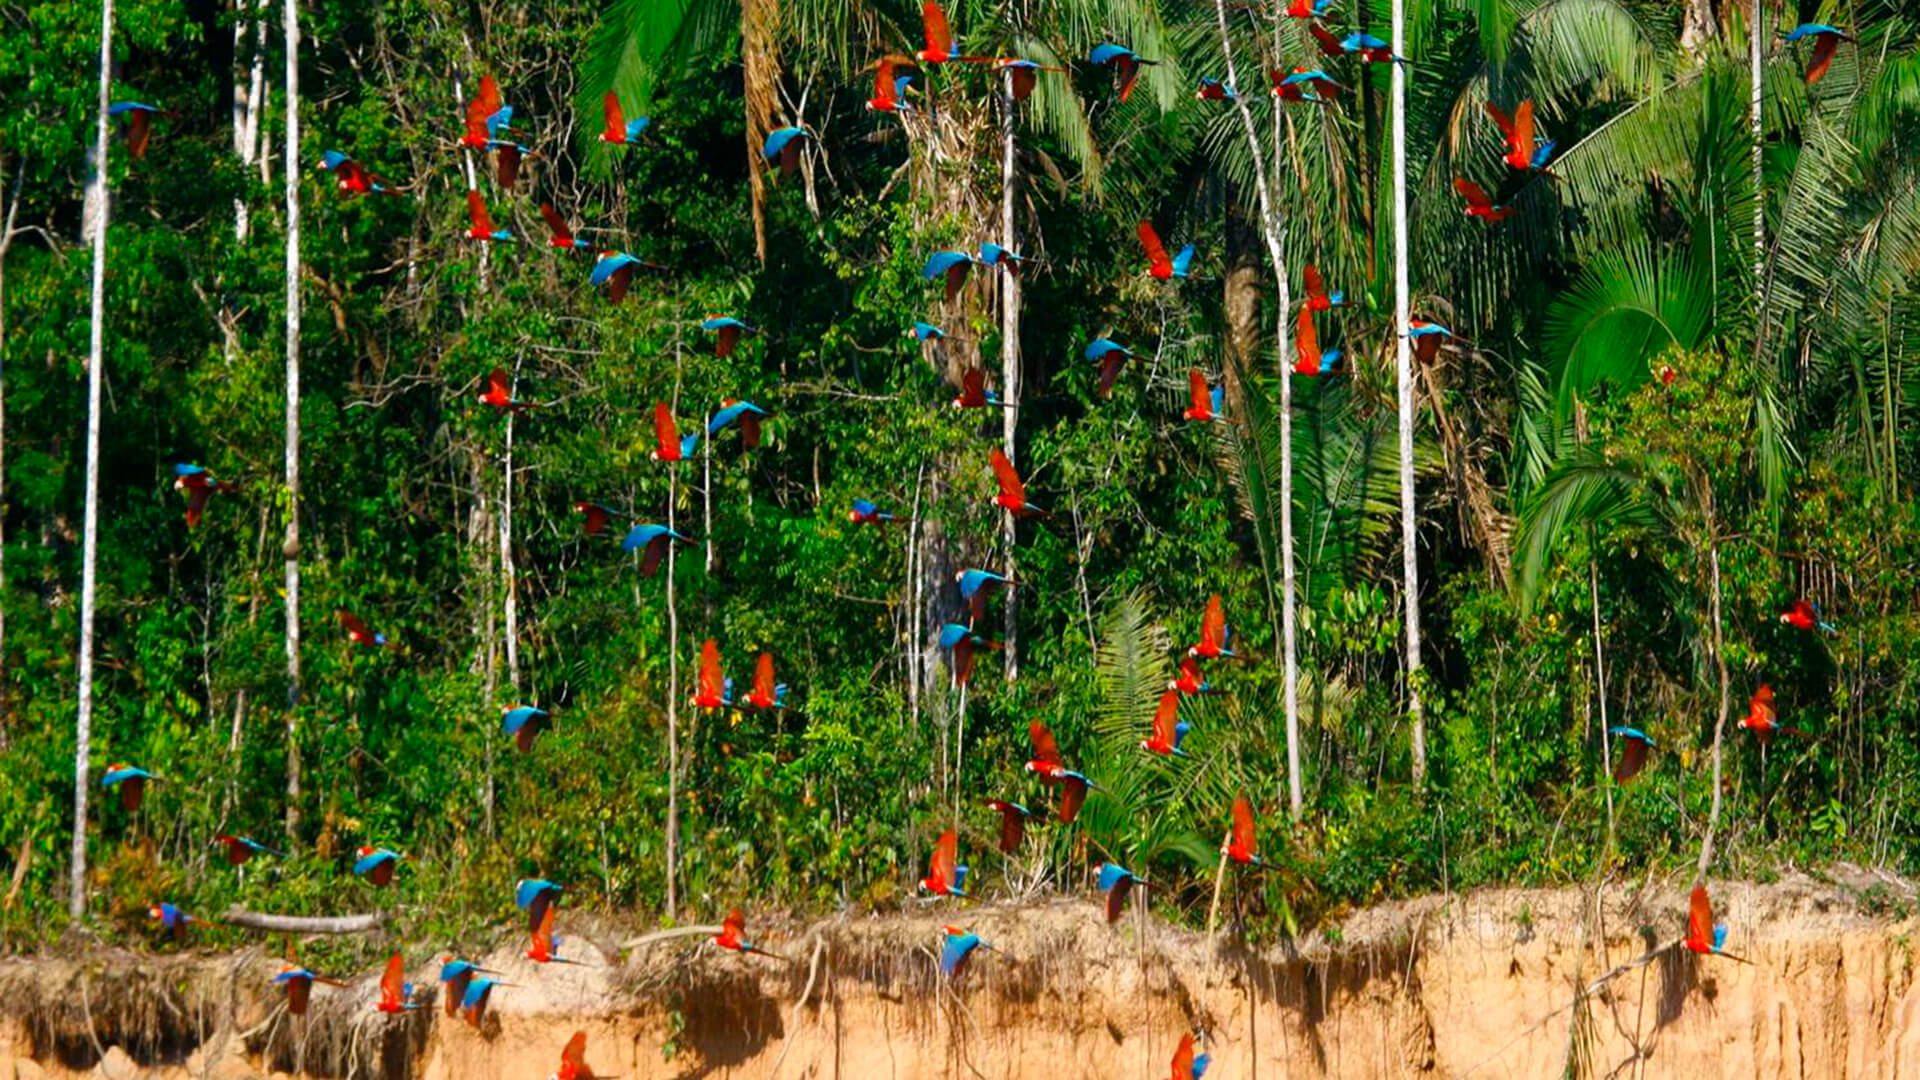 Macaws flying over a ravine near the river